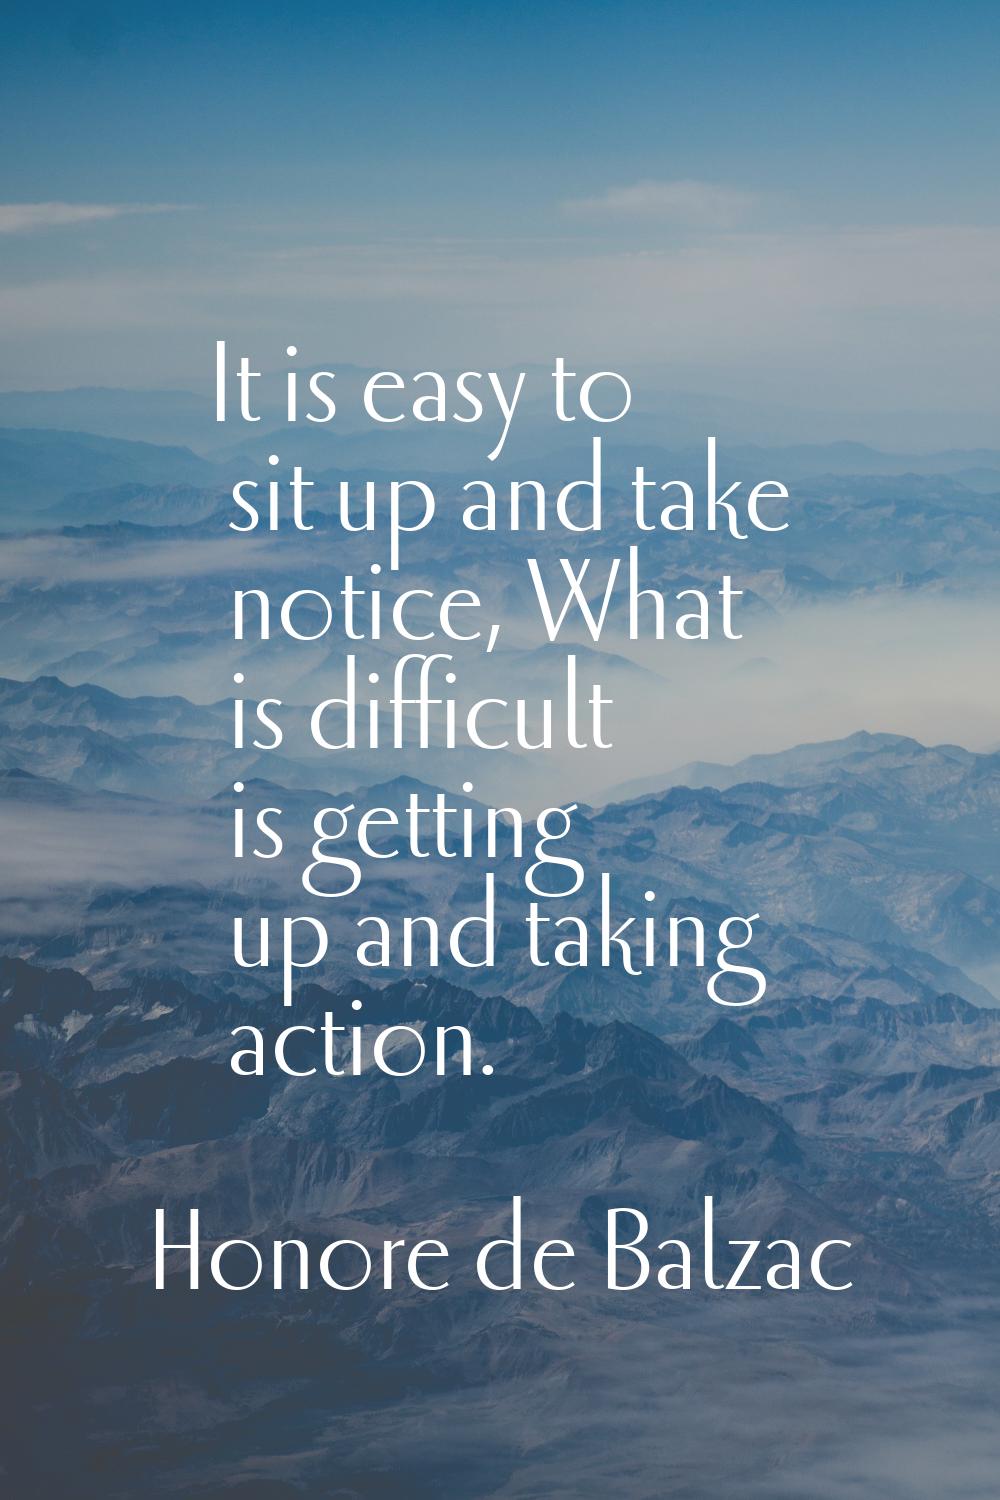 It is easy to sit up and take notice, What is difficult is getting up and taking action.